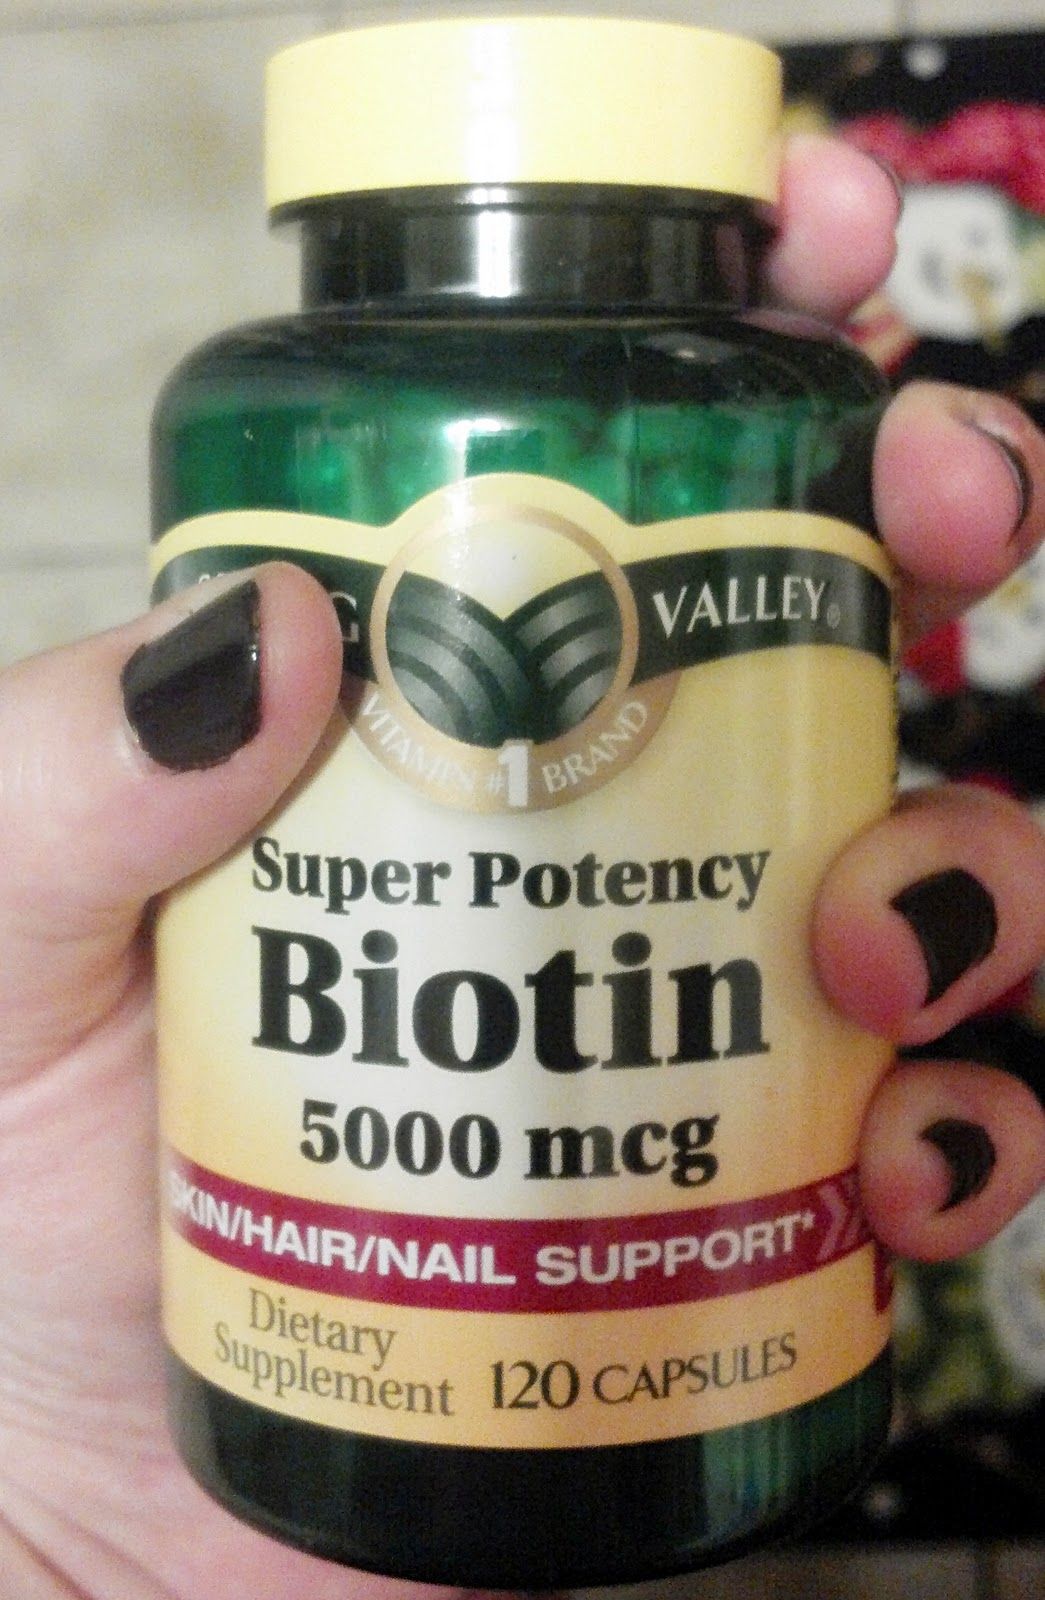 Biotin makes hair and nails grow fast and thick. It's good for your skin and